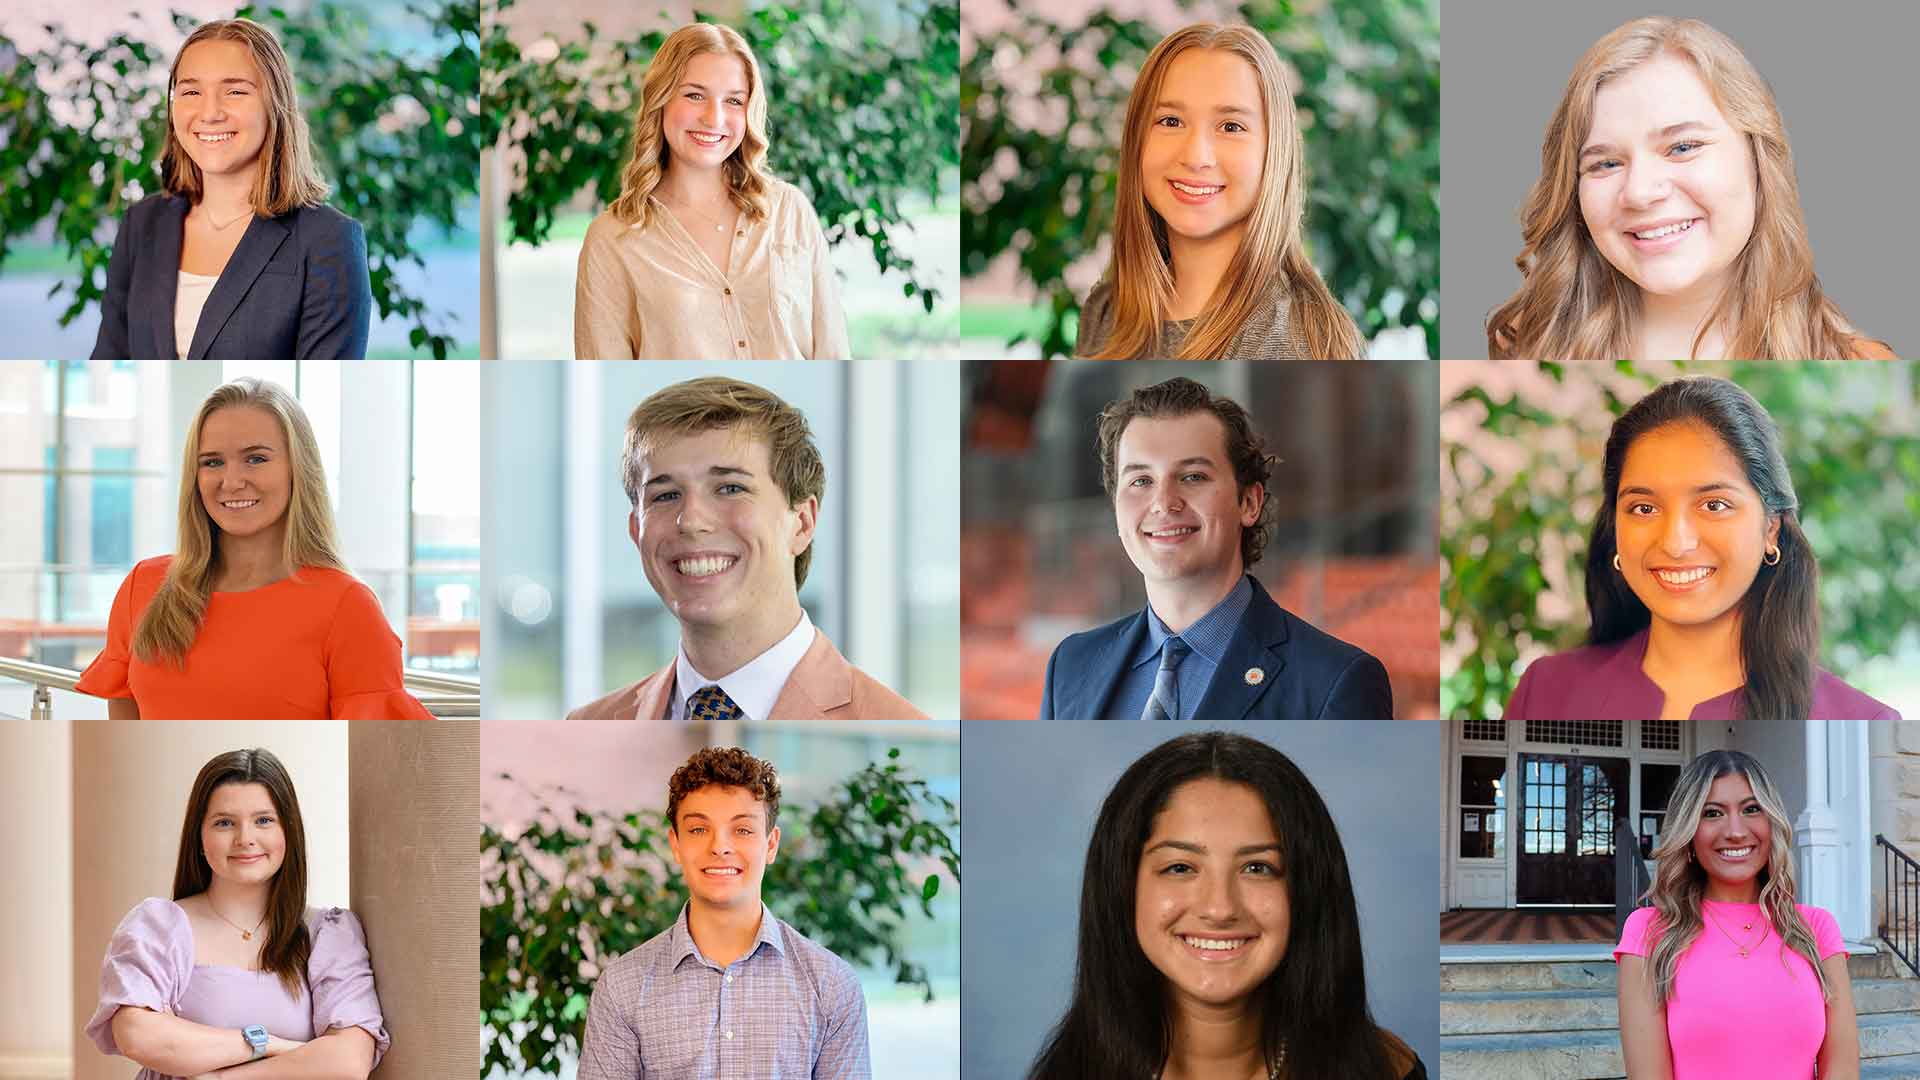 All 12 Dixon Global Policy Scholars, in alphabetical order - Katie Barfield, Ellison Groves, Gretchen Highberger, Carley Hitzelberger, Ava Minton, Briggs Murray, Nathaniel Oates, Tulsi Patel, Abigail Pickrel, Jackson Strickland, Mia Takvor and Bailee Tayles.